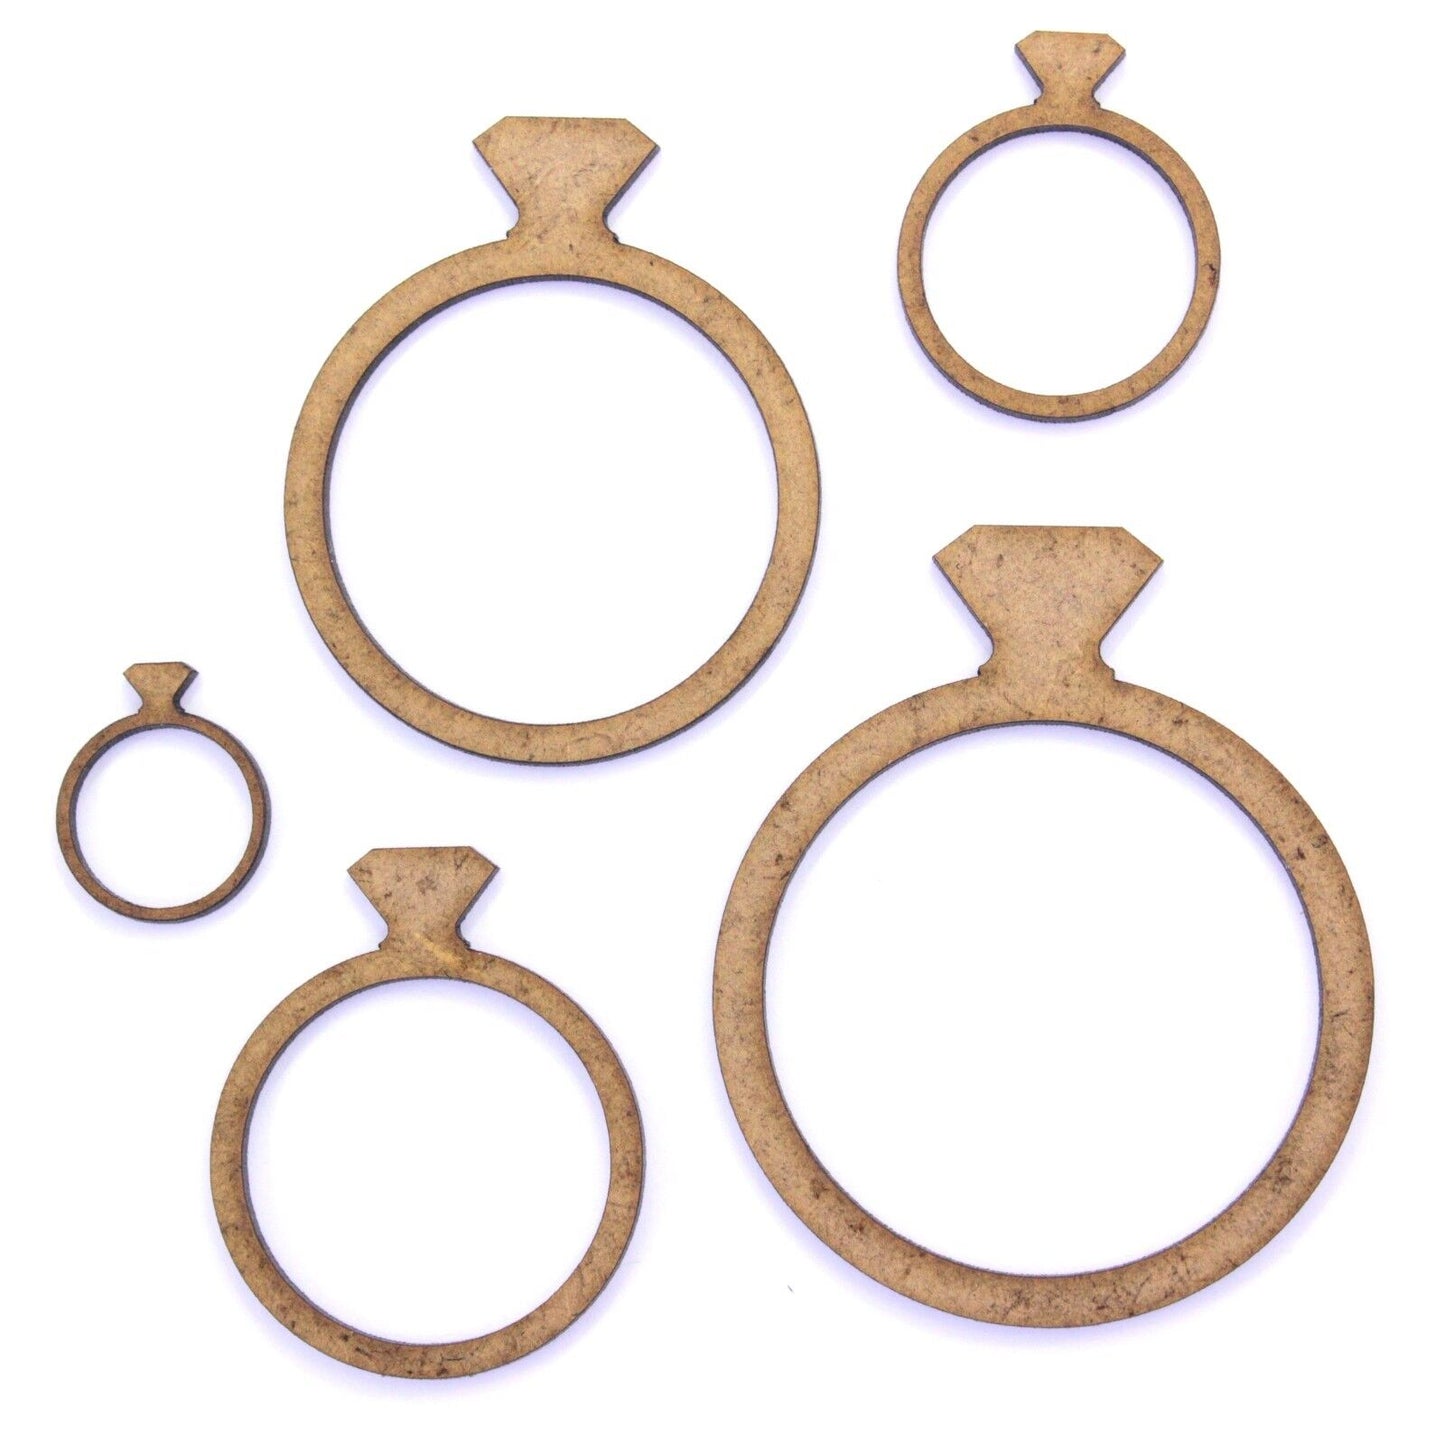 Diamond Engagement Ring Craft Shapes, 2mm MDF Wood. Wedding Jewelry marriage